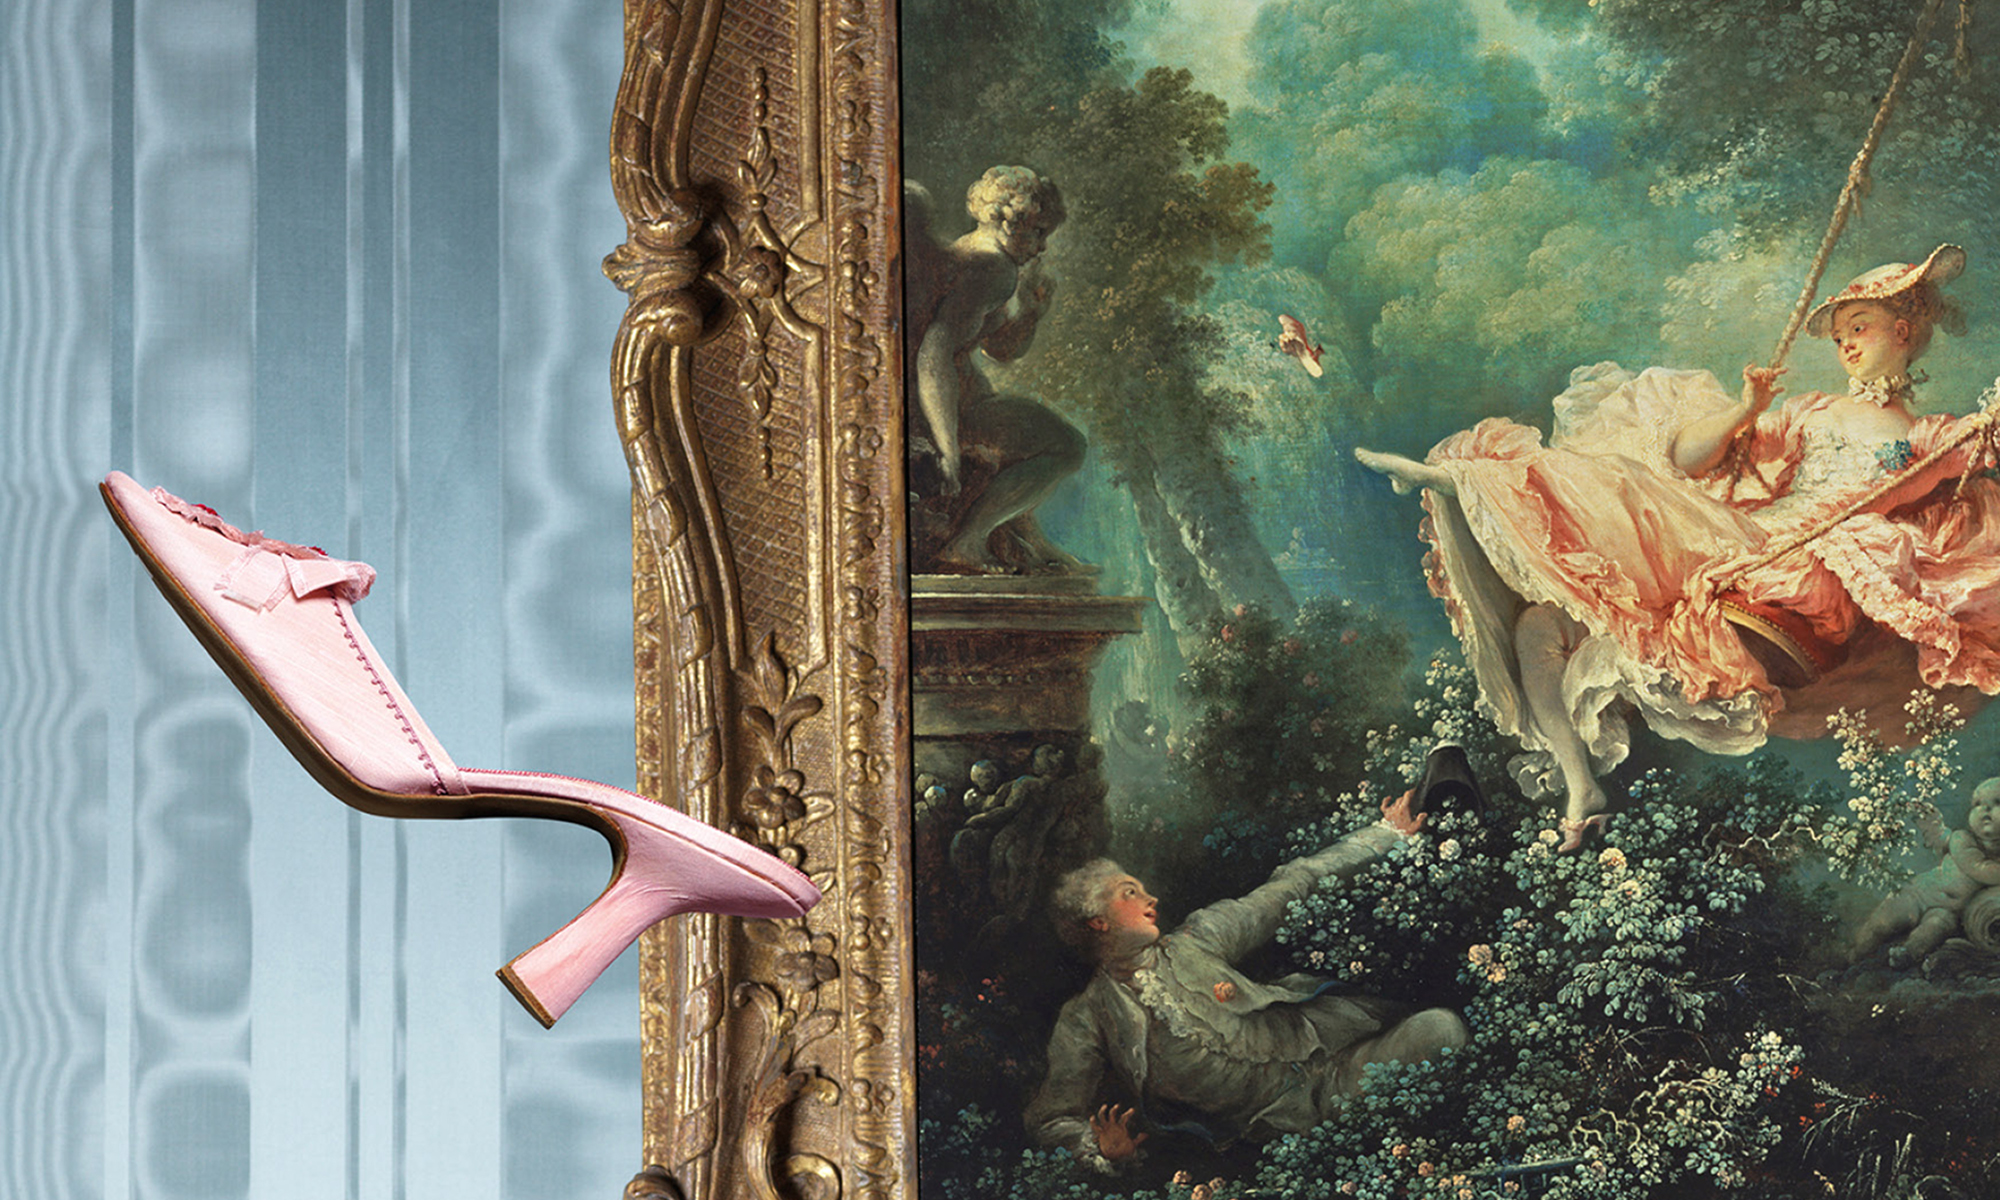 An Enquiring Mind – Manolo Blahnik at The Wallace Collection